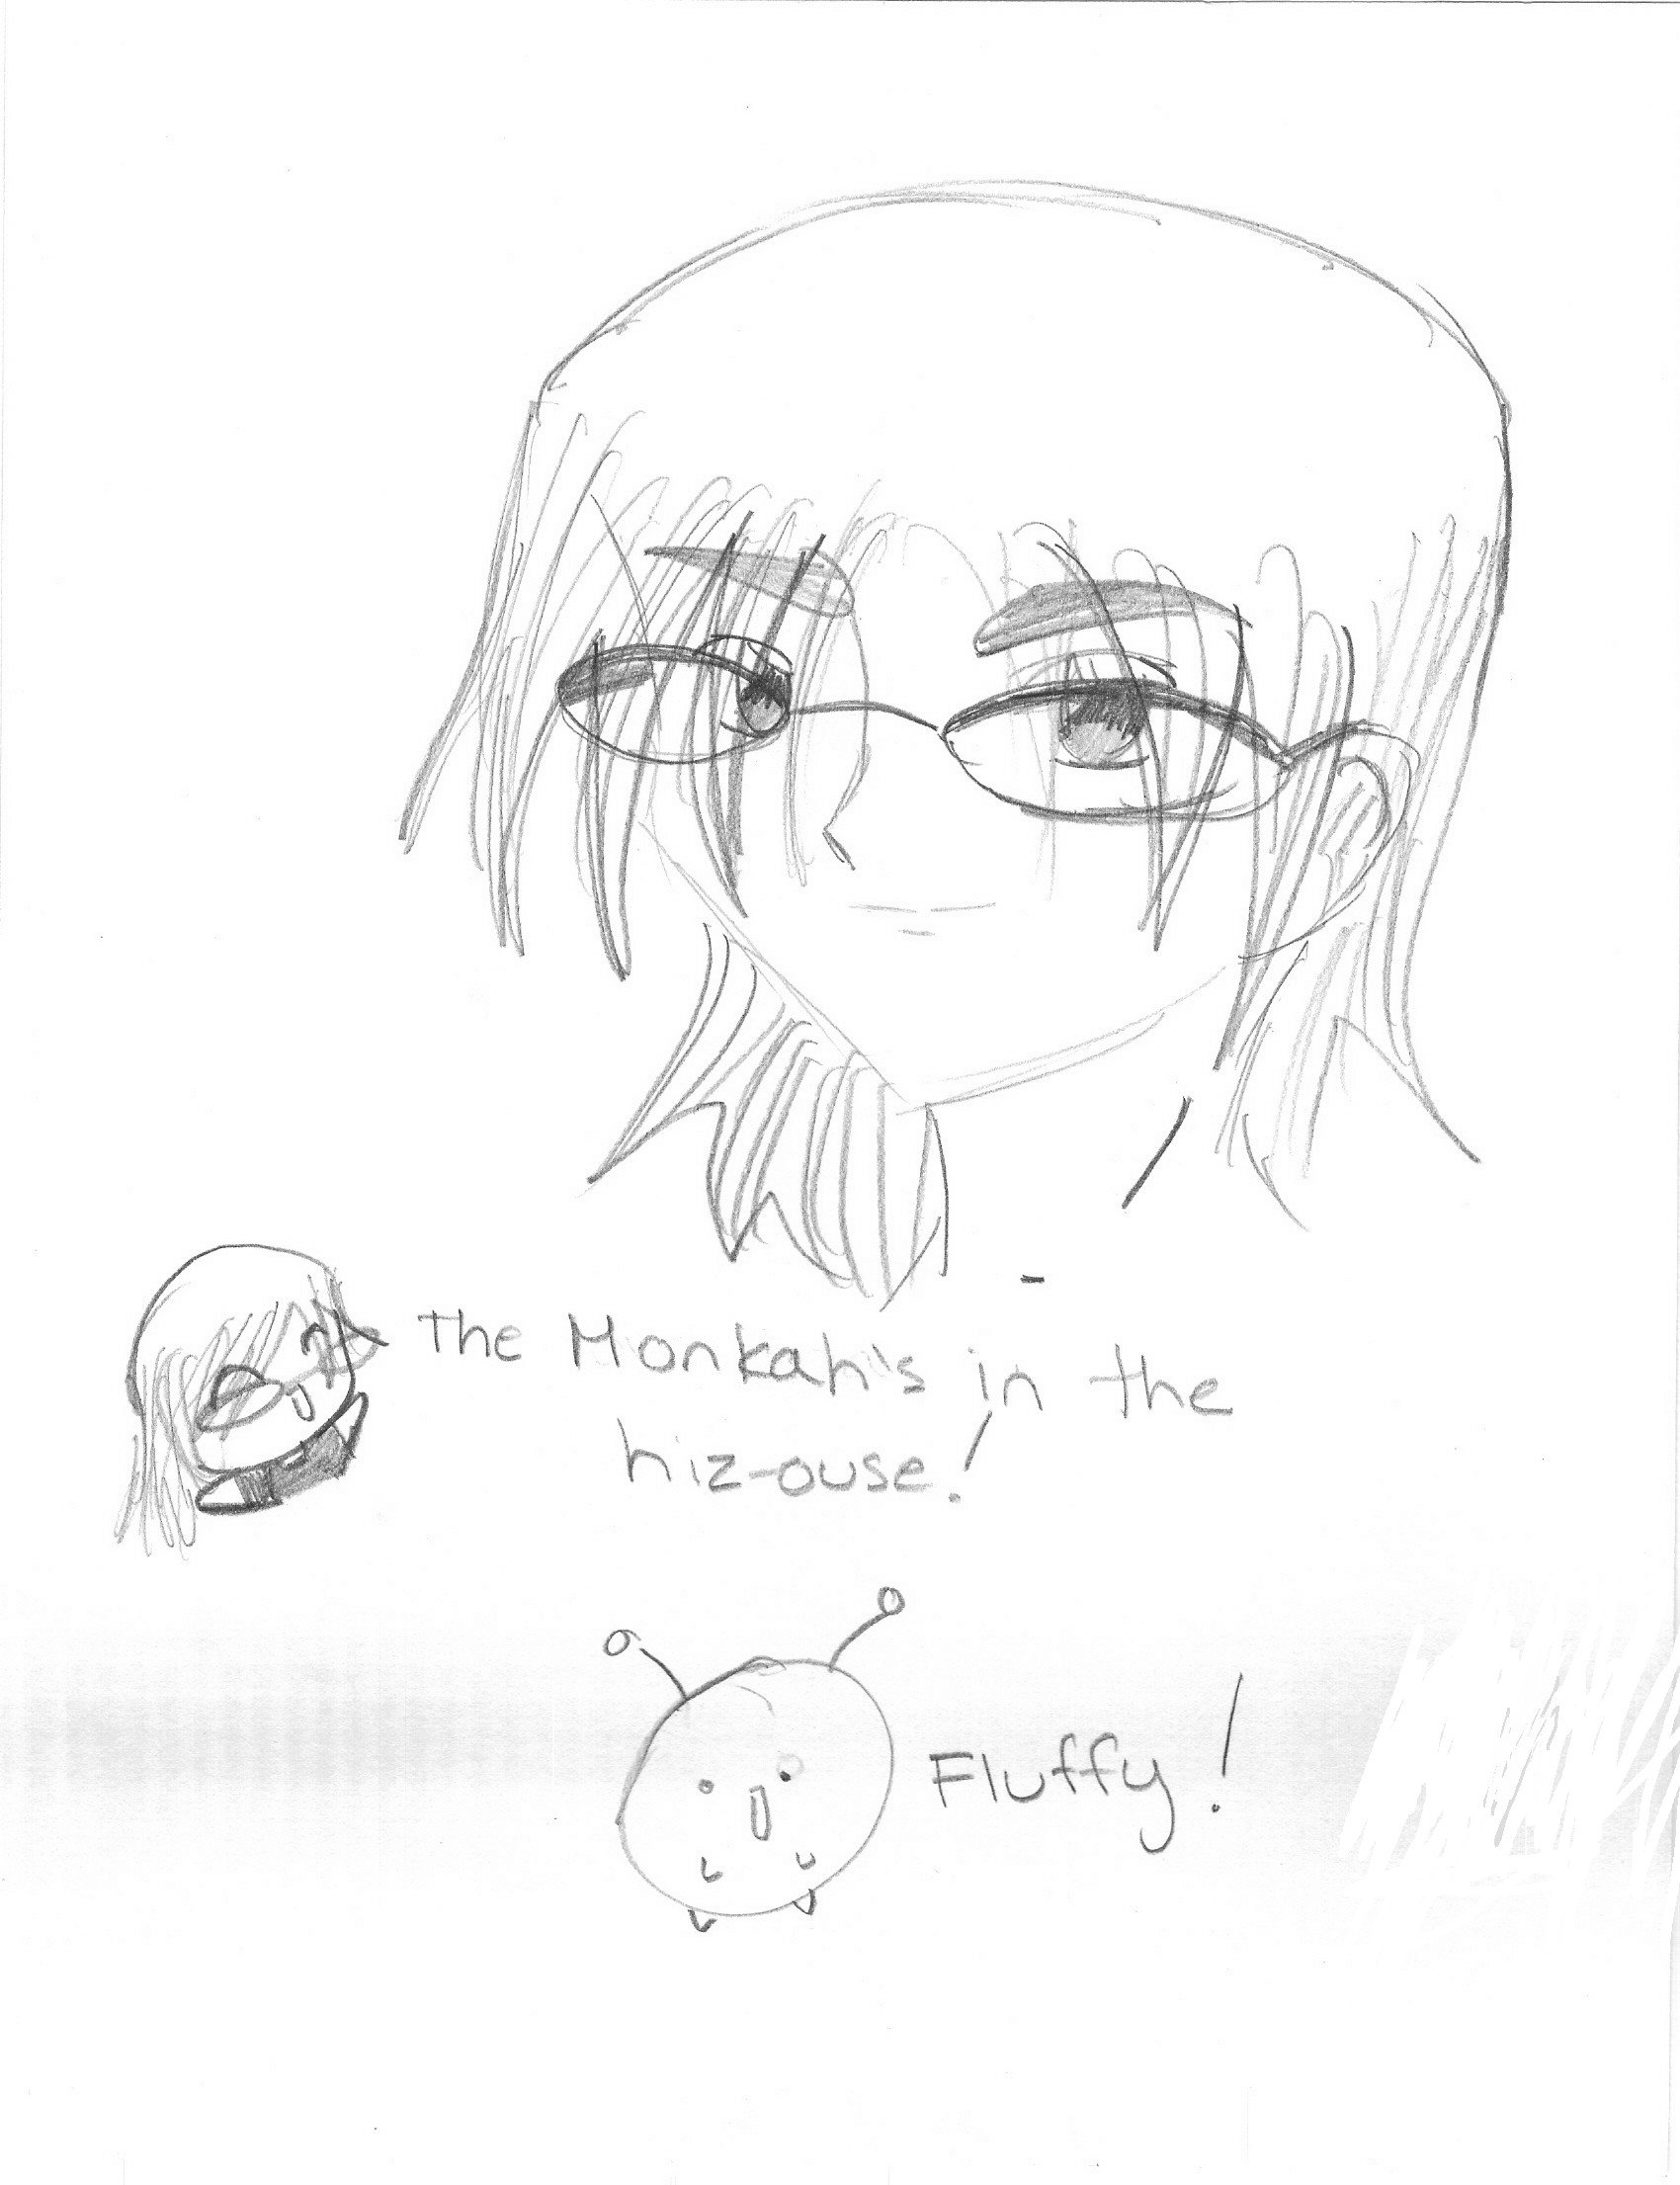 Monkah in the Hiz-ouse by SoulMonkah